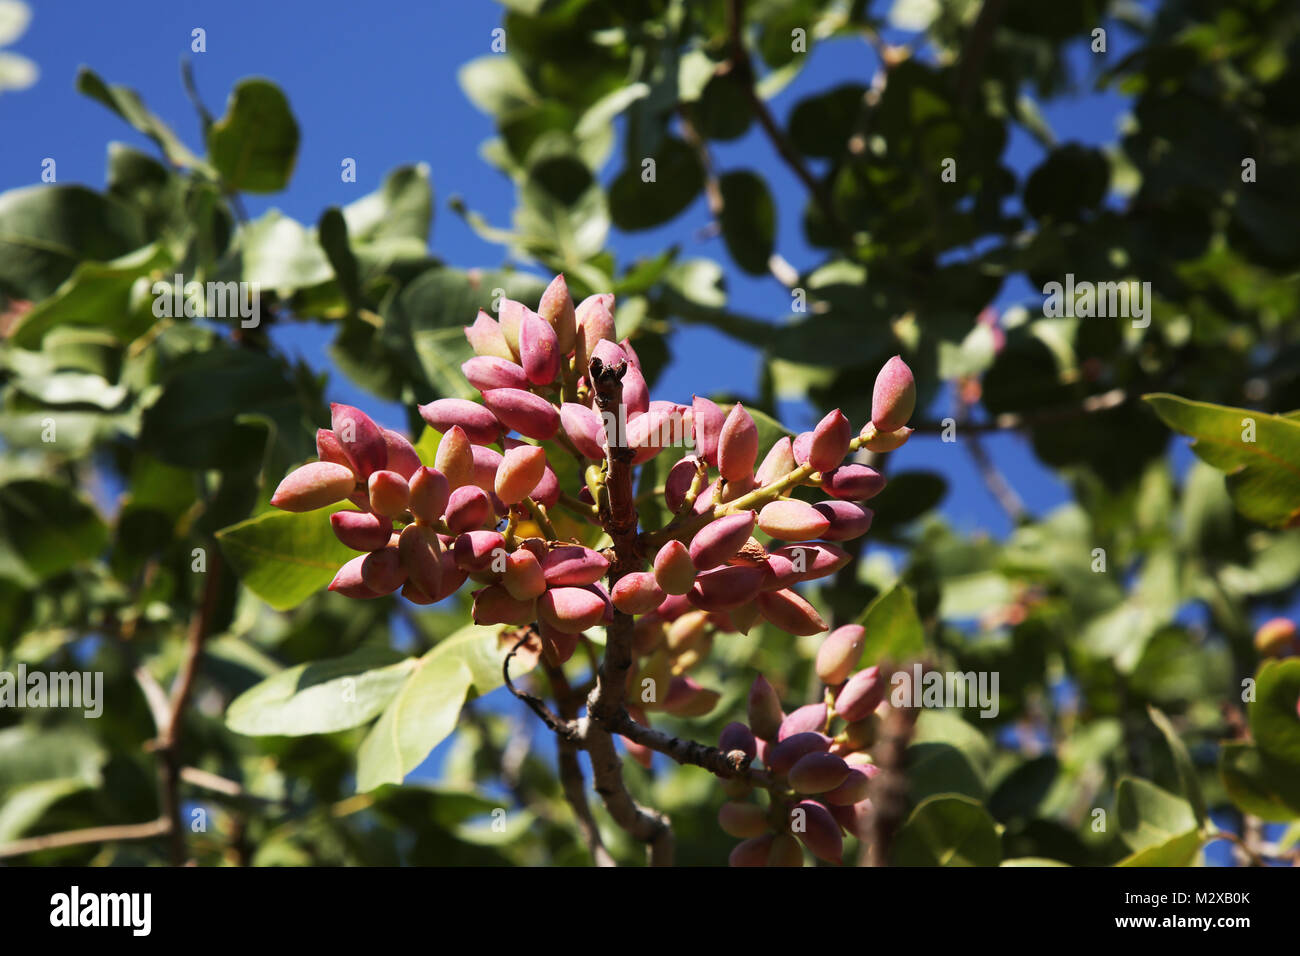 Pistachios grow on the tree in August in pistachio garden in gaziantep. Pistachios on a branch of the pistachio tree. Daylight. Close-up. Stock Photo